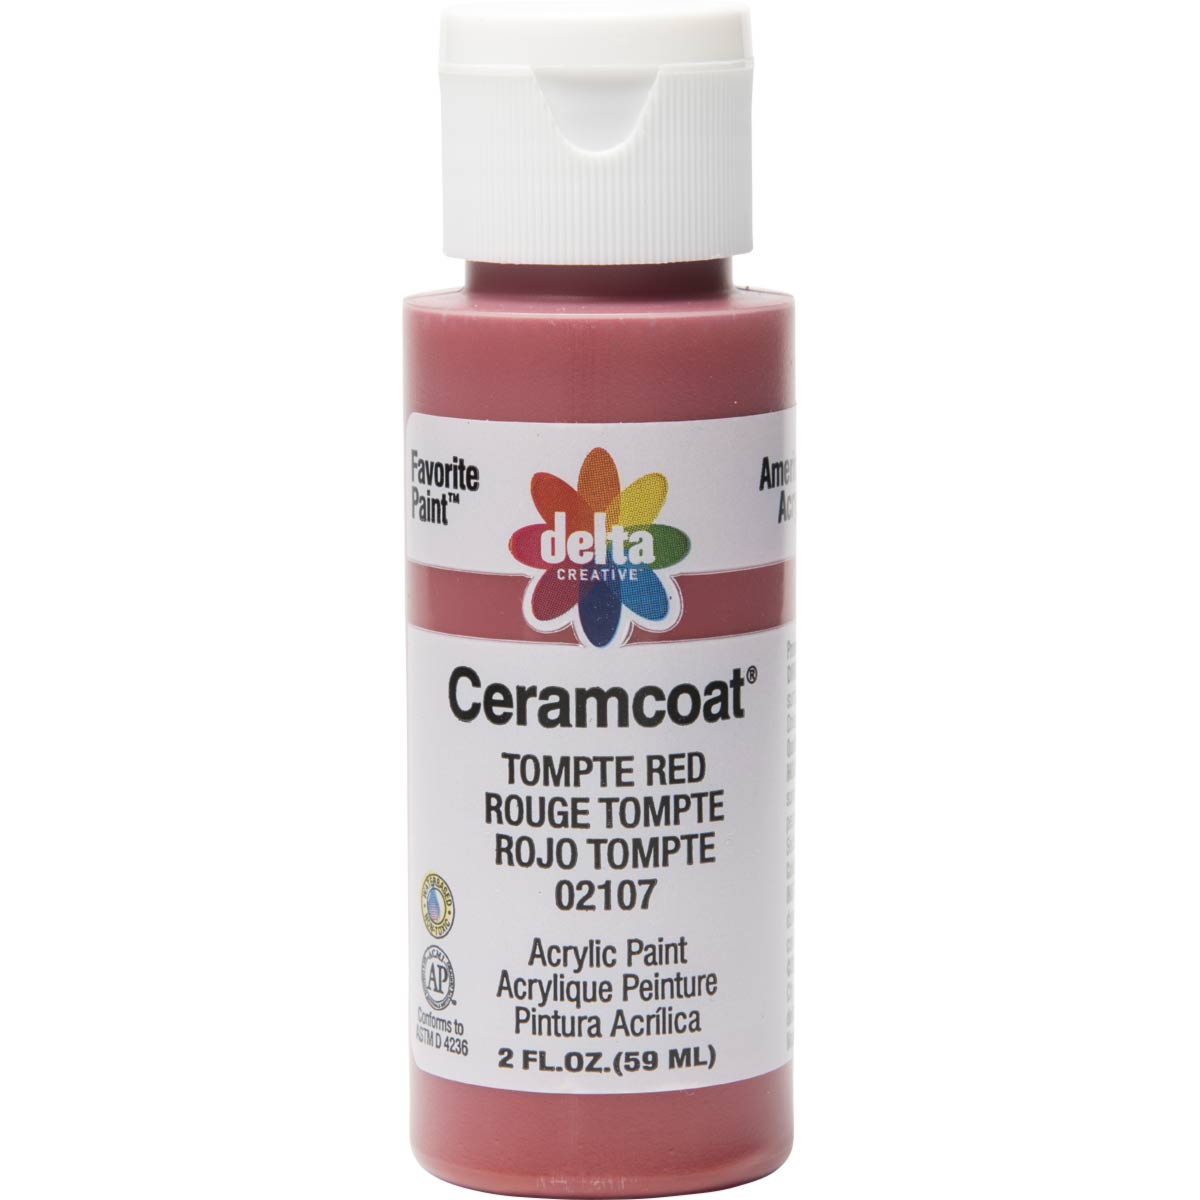 Delta Ceramcoat Acrylic Paint - Tompte Red, 2 oz. - 021070202W